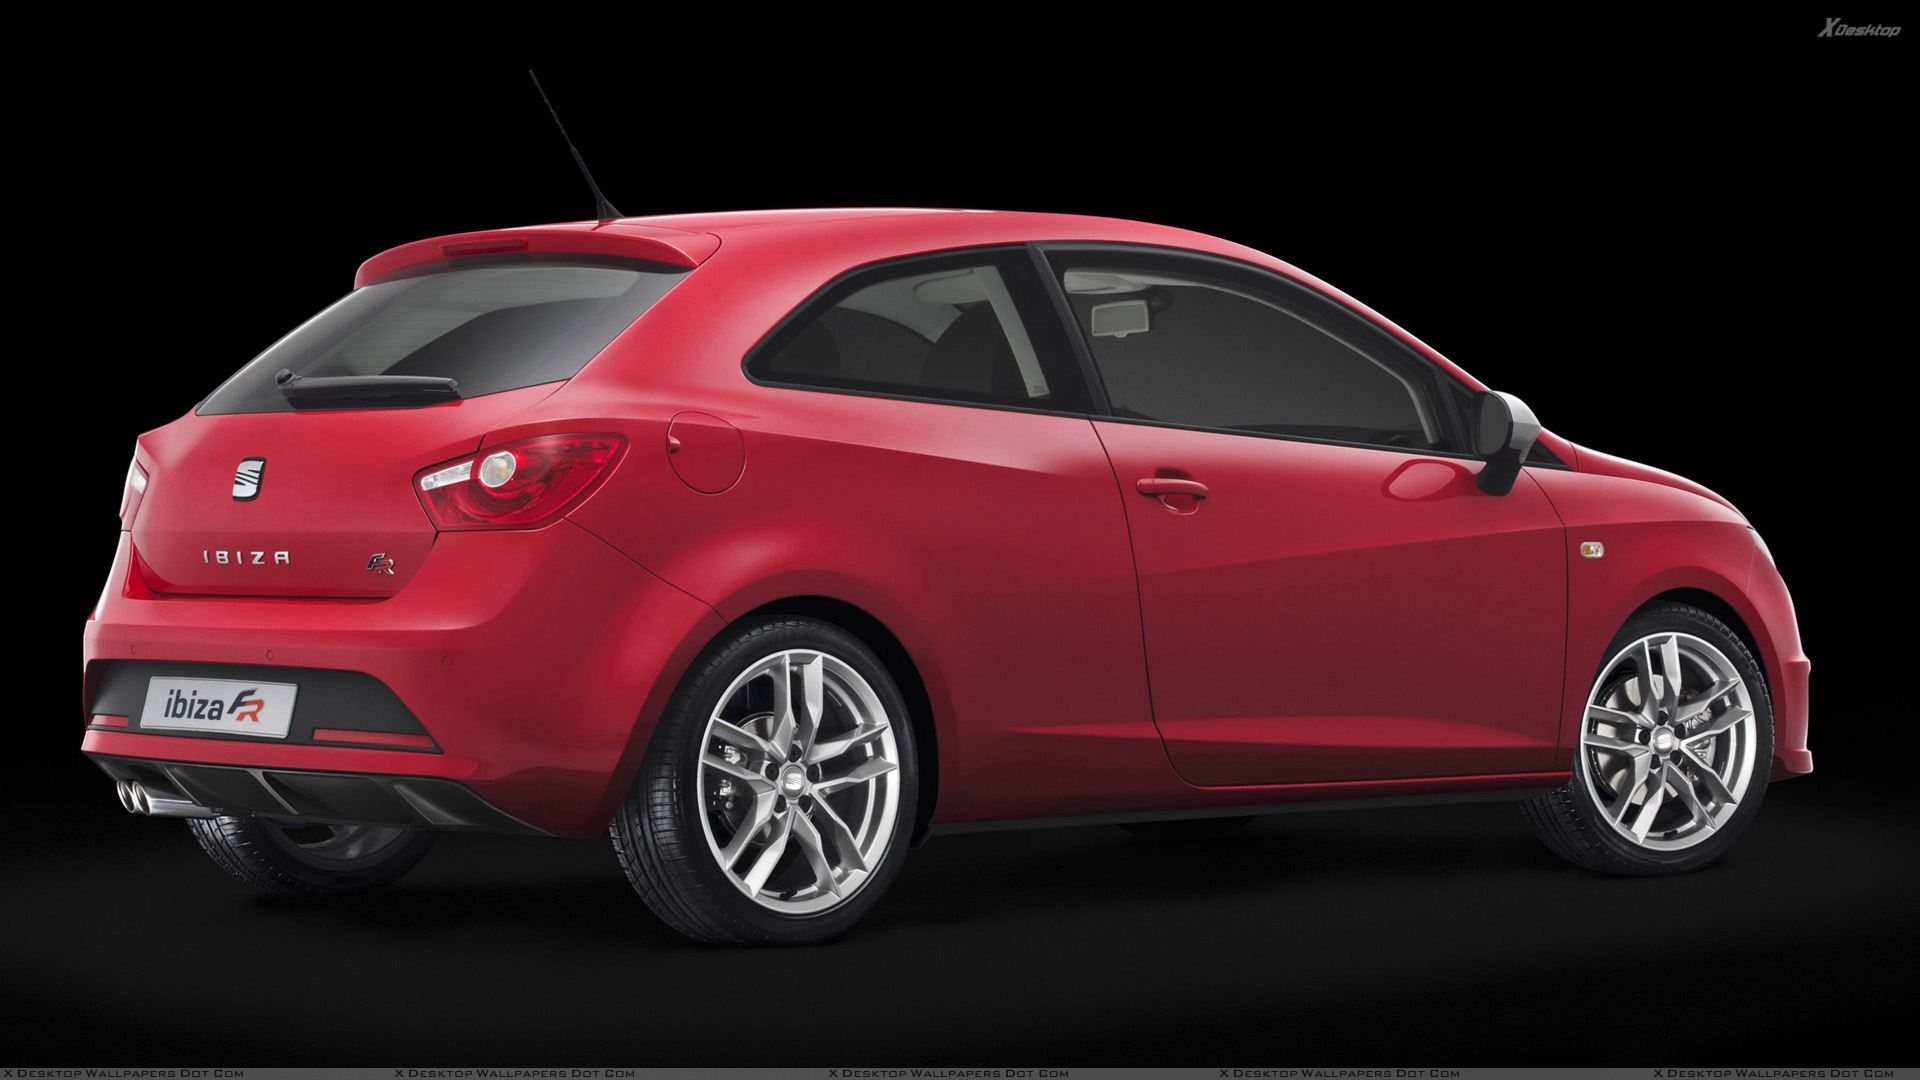 You Are Viewing Wallpaper Titled Seat Ibiza - Seat Ibiza 2017 Red , HD Wallpaper & Backgrounds